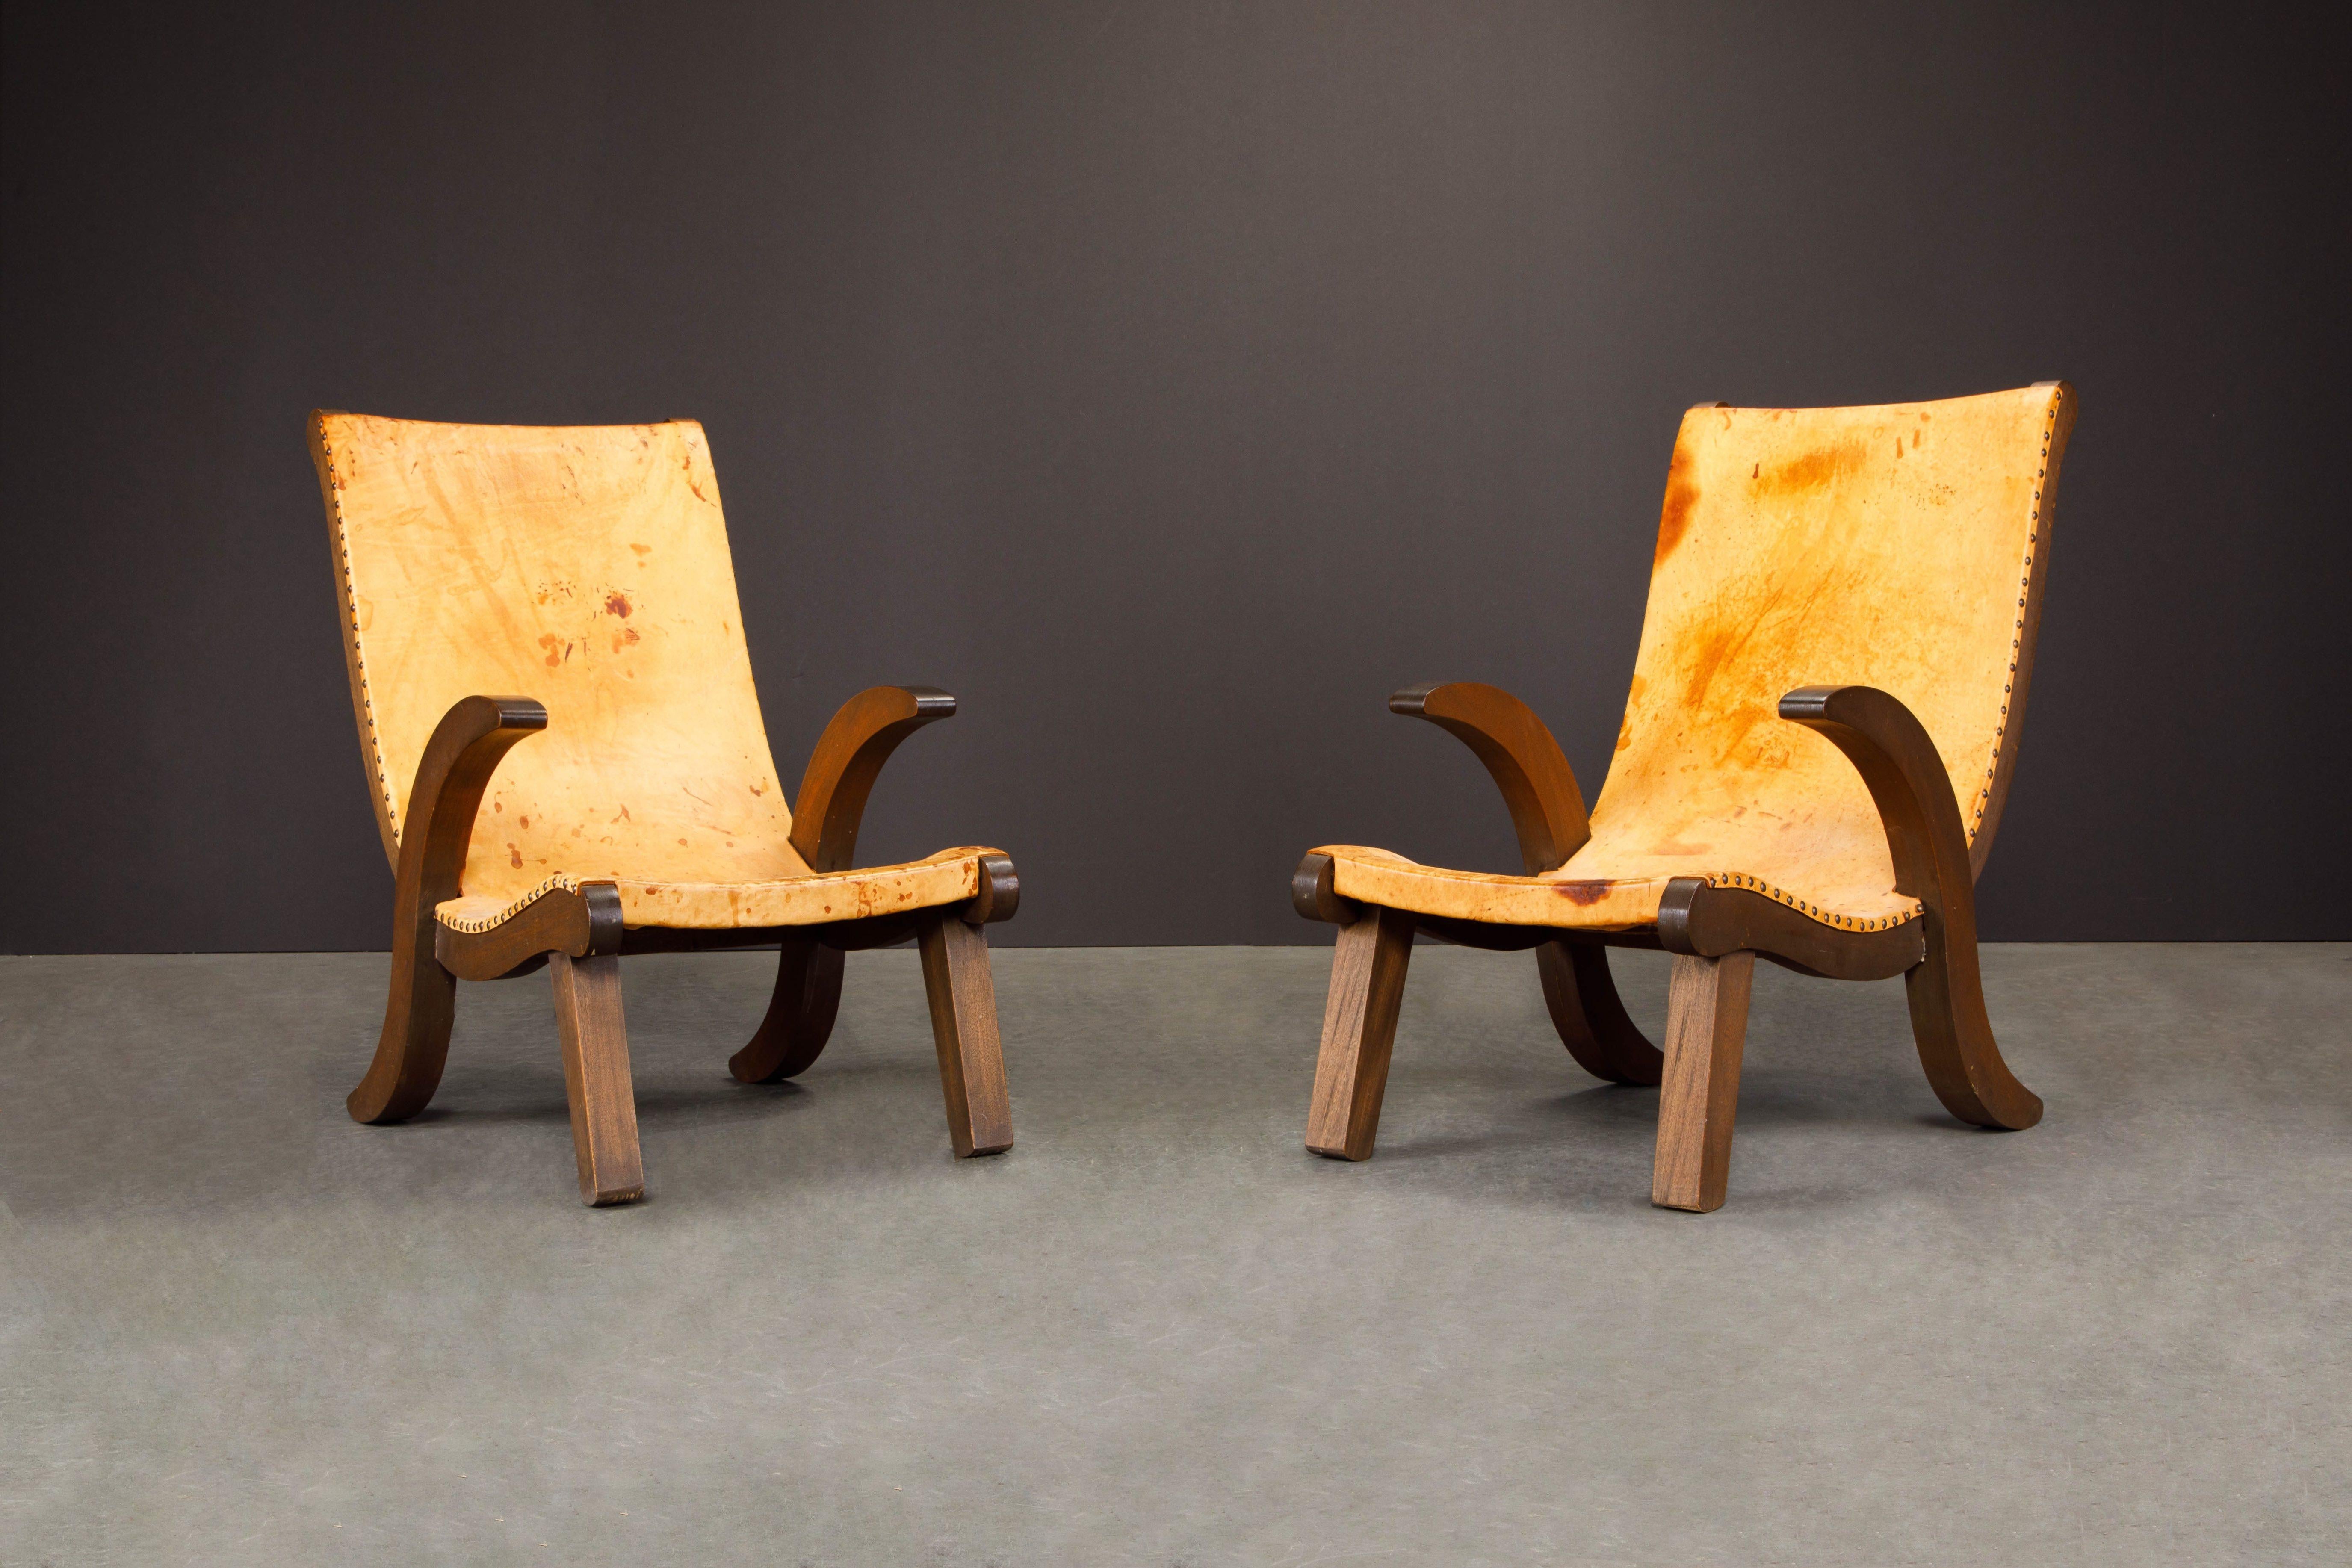 This beautiful pair of Clara Porset style Butaque chairs are in gorgeous aged leather, stained wood and brass rivets. These incredible lounge chairs are as comfortable as they are stylish with thick aged saddle leather sling seats attached with